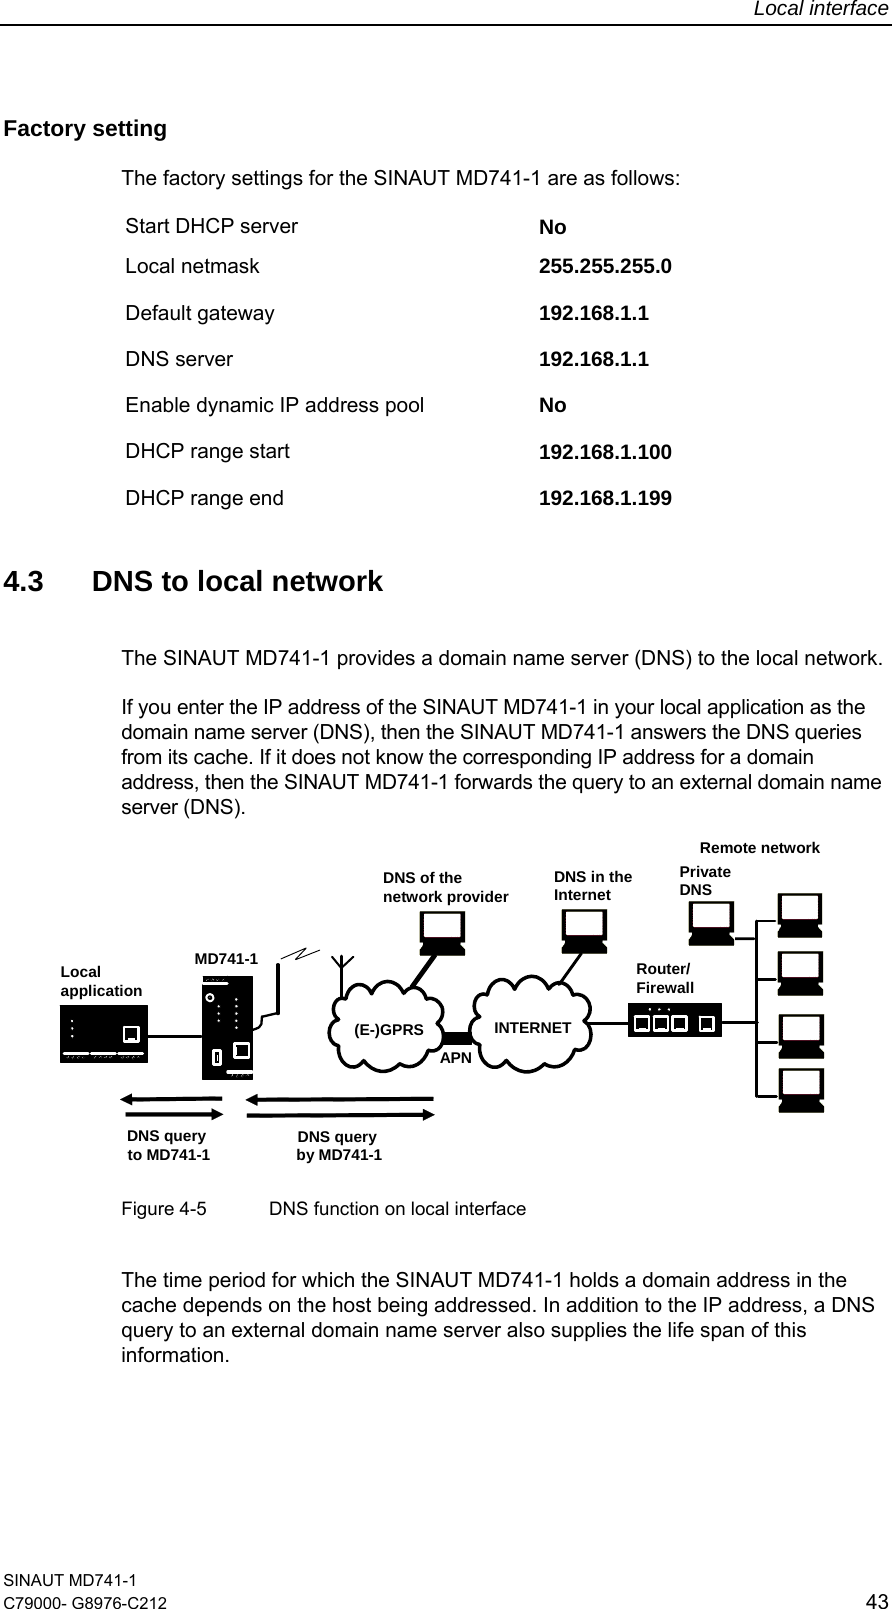 Local interface SINAUT MD741-1 C79000- G8976-C212  43  Factory setting  The factory settings for the SINAUT MD741-1 are as follows: Start DHCP server  No Local netmask  255.255.255.0 Default gateway  192.168.1.1 DNS server  192.168.1.1 Enable dynamic IP address pool  No DHCP range start  192.168.1.100  DHCP range end  192.168.1.199  4.3  DNS to local network The SINAUT MD741-1 provides a domain name server (DNS) to the local network.  If you enter the IP address of the SINAUT MD741-1 in your local application as the domain name server (DNS), then the SINAUT MD741-1 answers the DNS queries from its cache. If it does not know the corresponding IP address for a domain address, then the SINAUT MD741-1 forwards the query to an external domain name server (DNS). APN(E-)GPRS INTERNETMD741-1LocalapplicationRouter/FirewallRemote networkDNS queryby MD741-1DNS of thenetwork provider DNS in theInternetPrivateDNSDNS queryto MD741-1 Figure 4-5  DNS function on local interface  The time period for which the SINAUT MD741-1 holds a domain address in the cache depends on the host being addressed. In addition to the IP address, a DNS query to an external domain name server also supplies the life span of this information.  